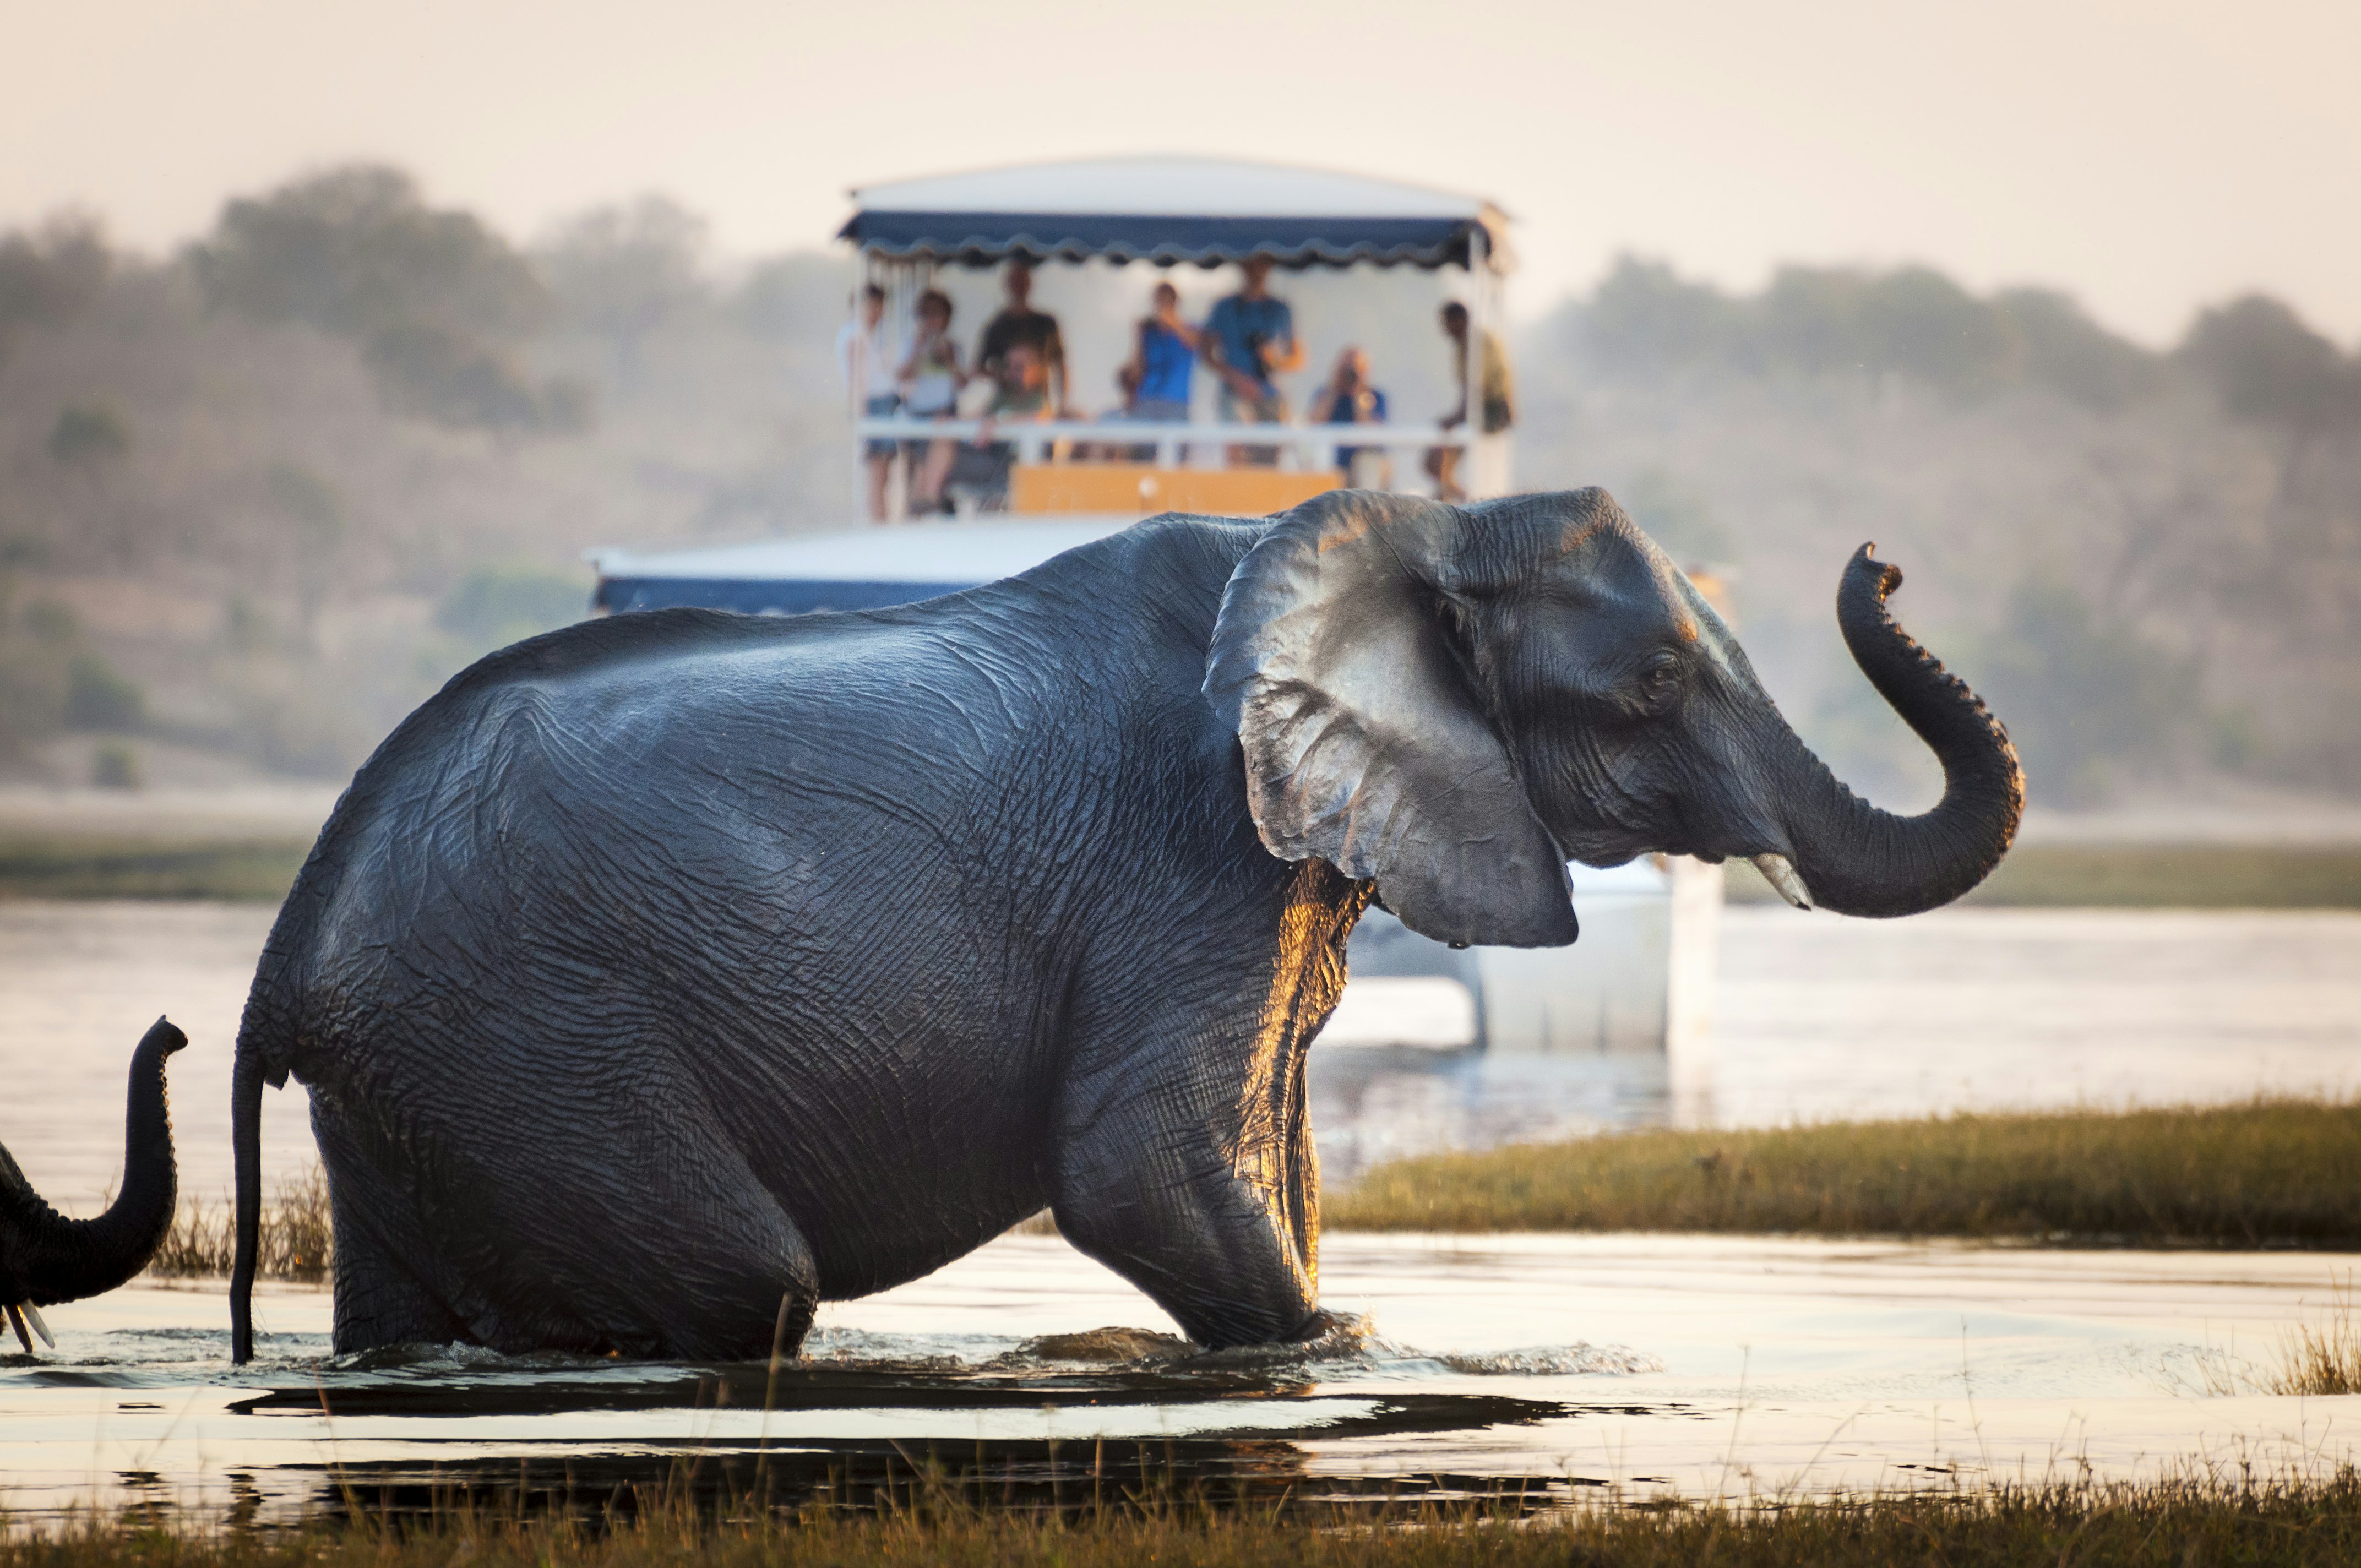 Tourists watch an elephant crossing a river in Chobe National Park, Botswana